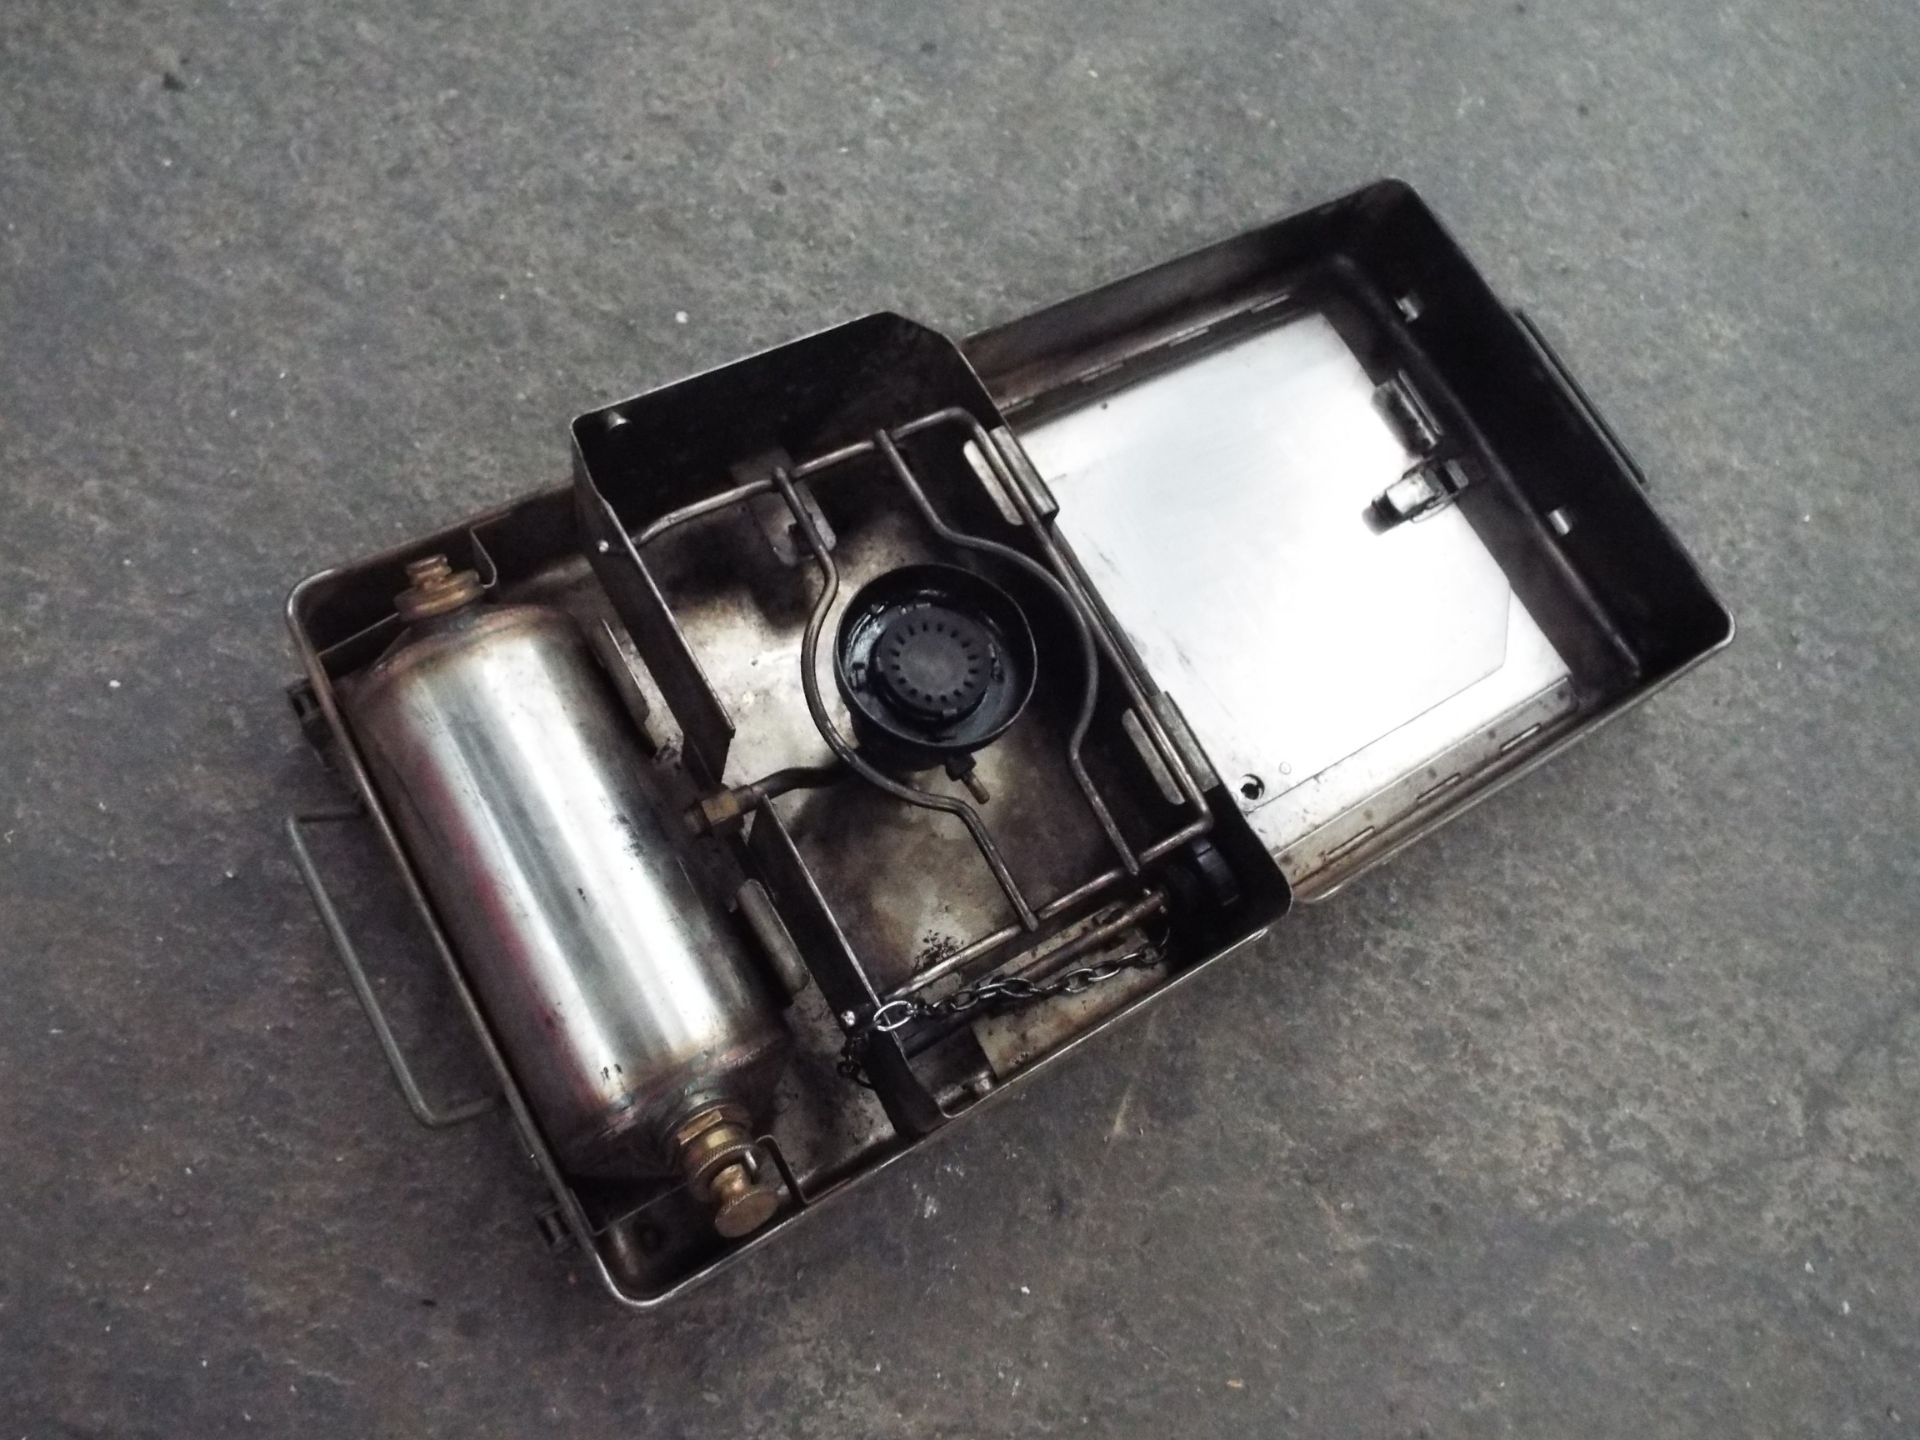 No. 12 Stove, Diesel Cooker/Camping Stove - Image 4 of 7